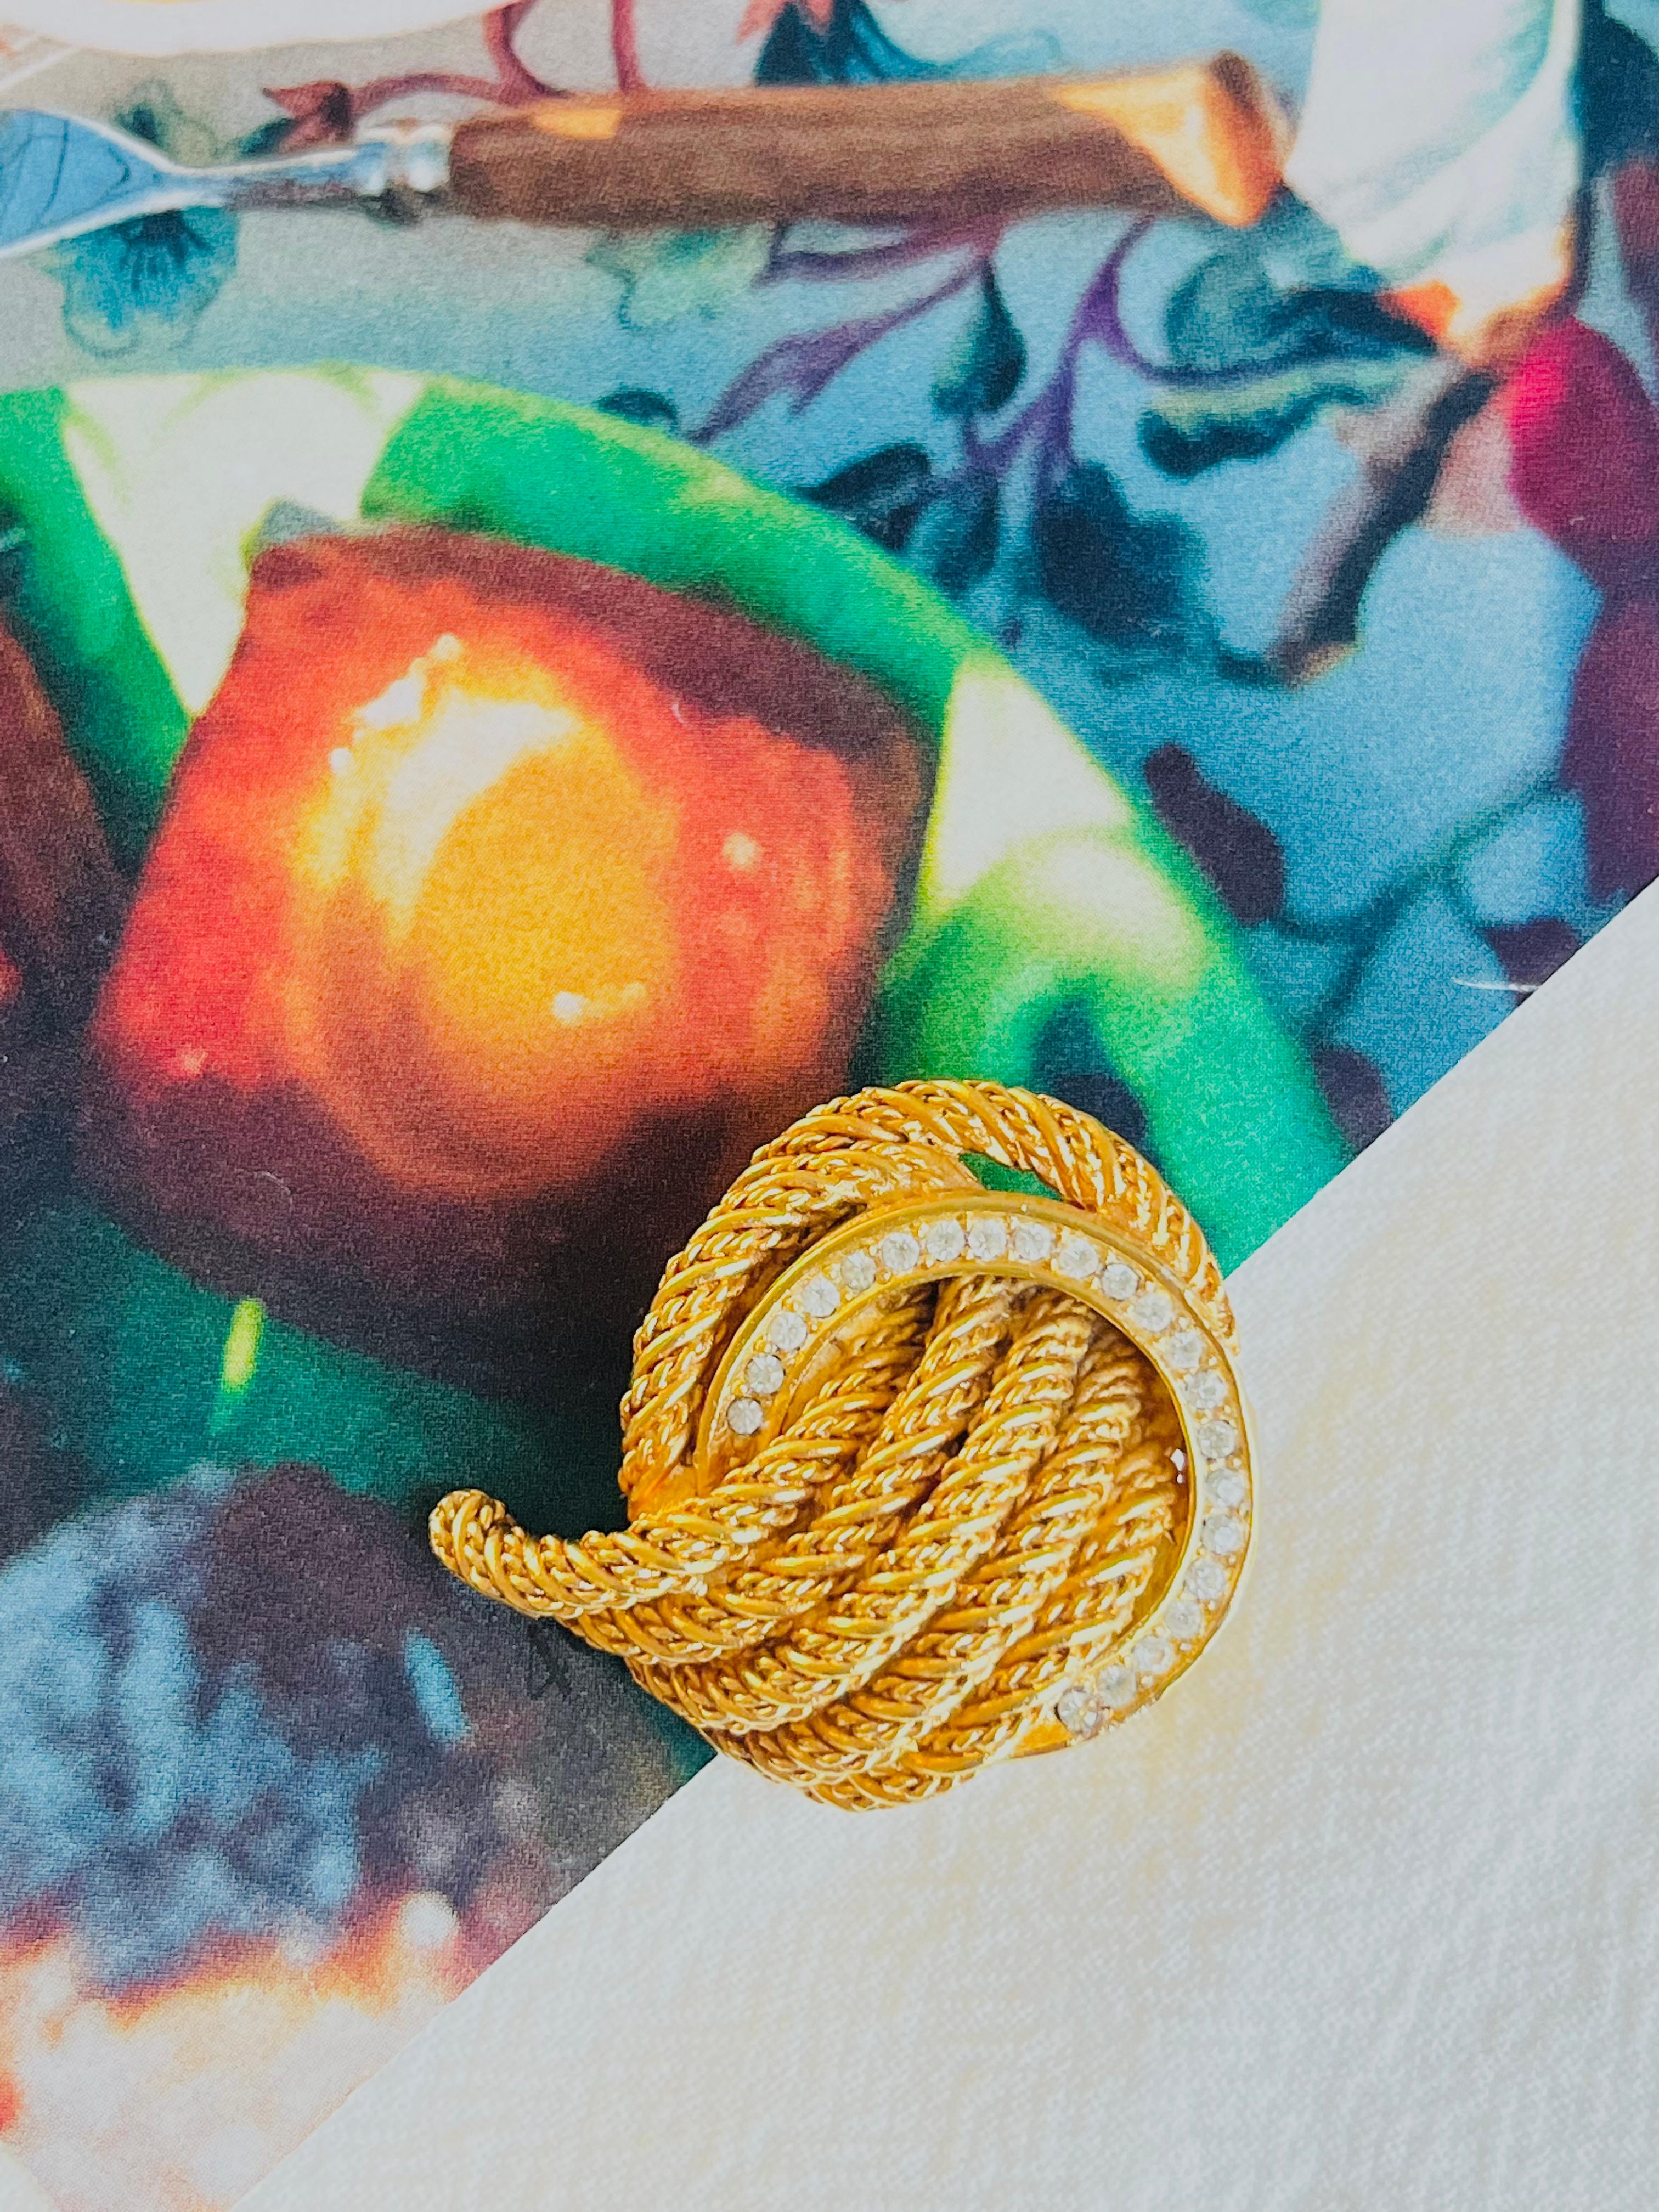 Very excellent condition. 100% genuine.

A unique piece. This is gold plated stylised brooch.

Safety-catch pin closure.

Size: 3.2 cm x 3.6 cm.

Weight: 15.0 g.

_ _ _

Great for everyday wear. Come with velvet pouch and beautiful package.

Makes